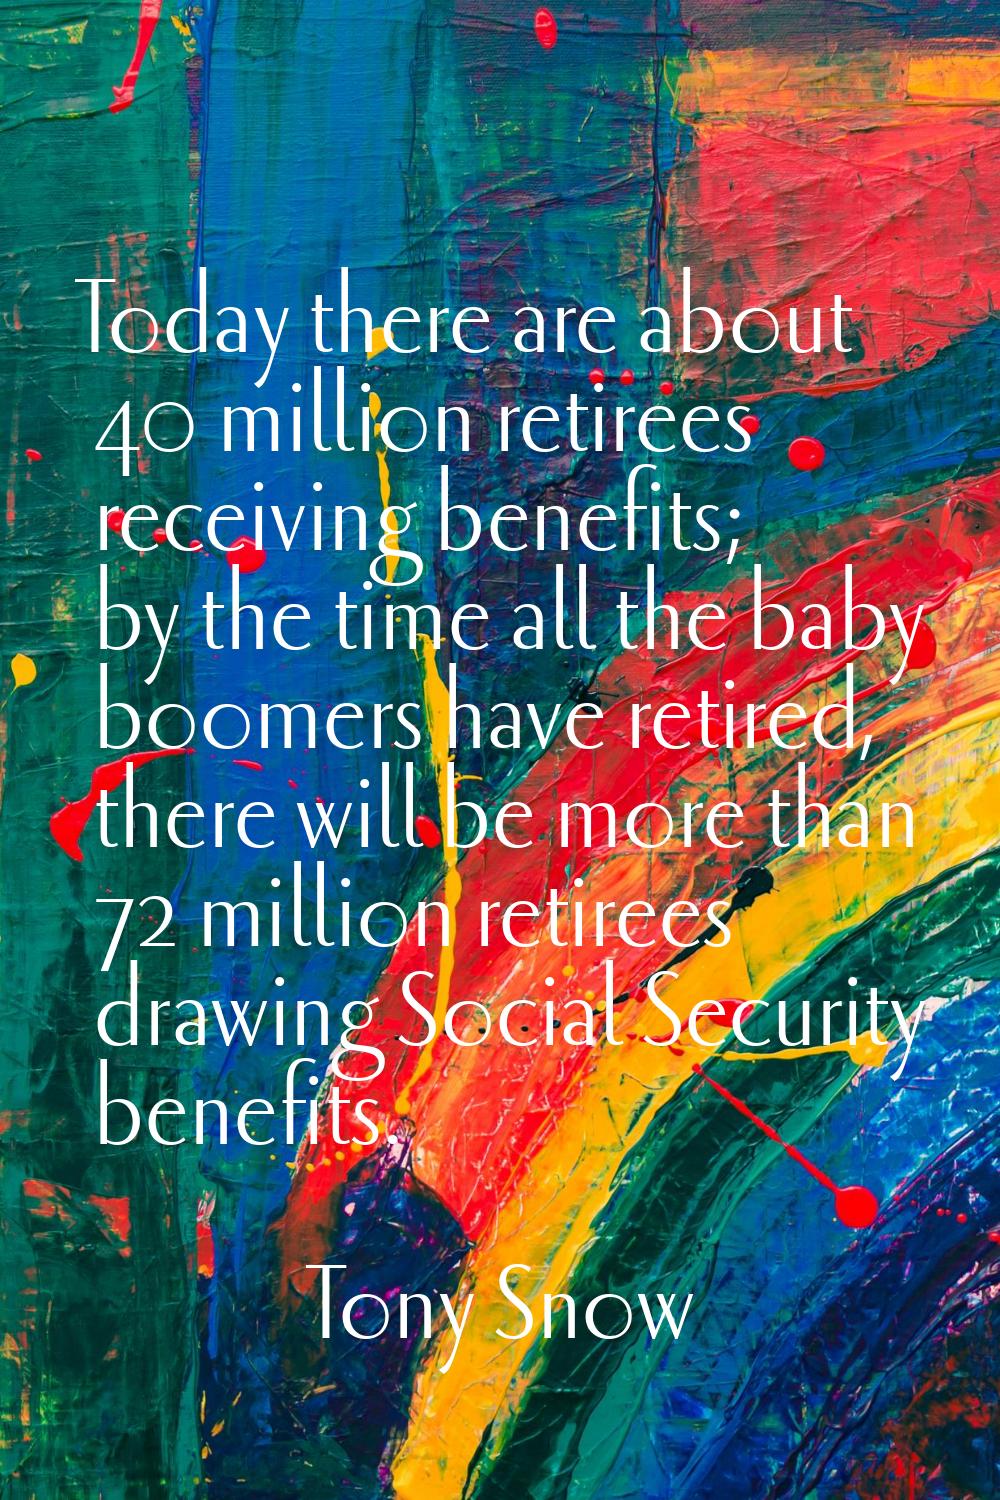 Today there are about 40 million retirees receiving benefits; by the time all the baby boomers have